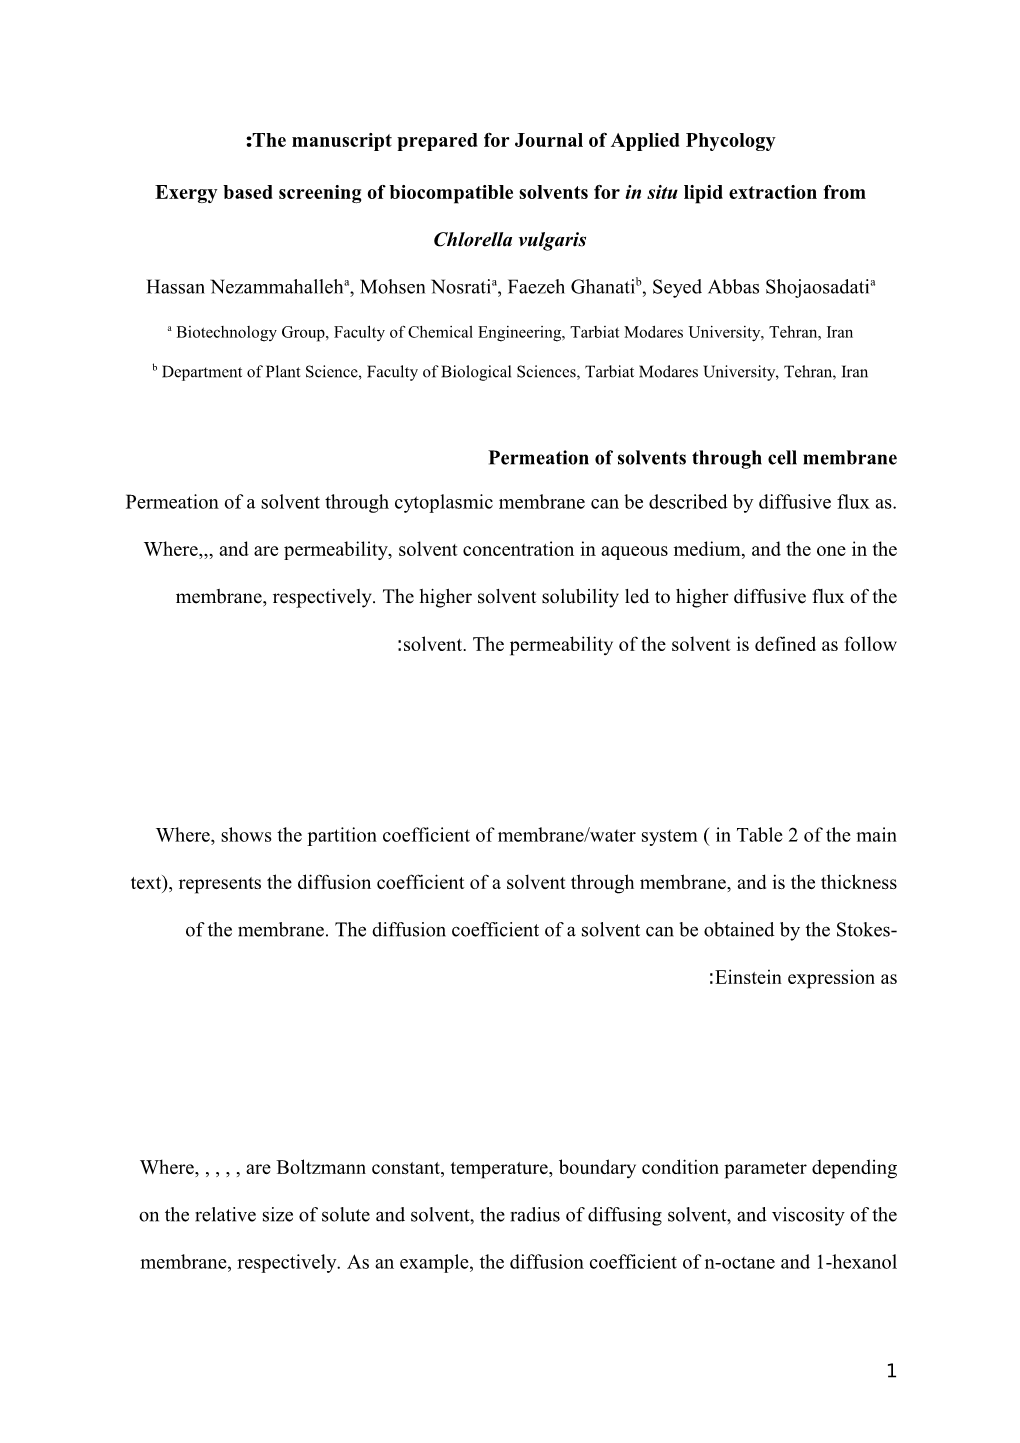 The Manuscript Prepared for Journal of Applied Phycology